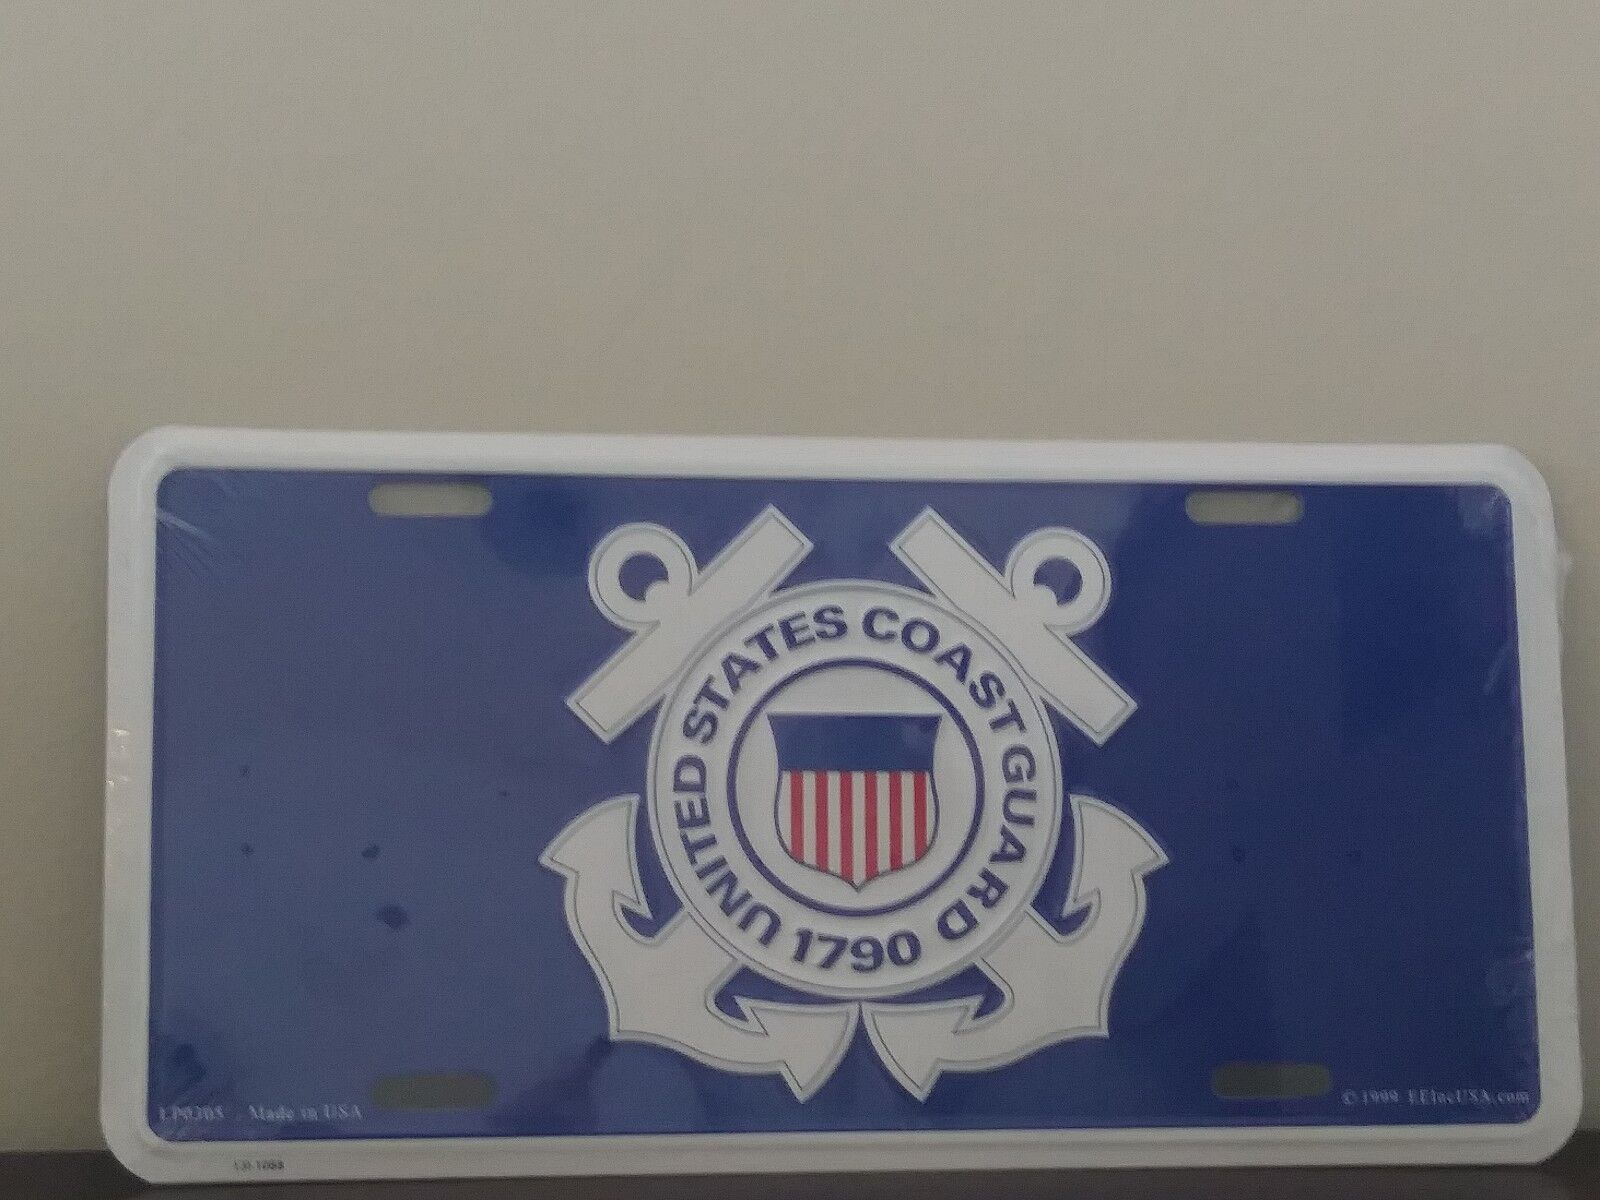 United States Coast Guard with USCG Logo on Blue Embossed License Plate